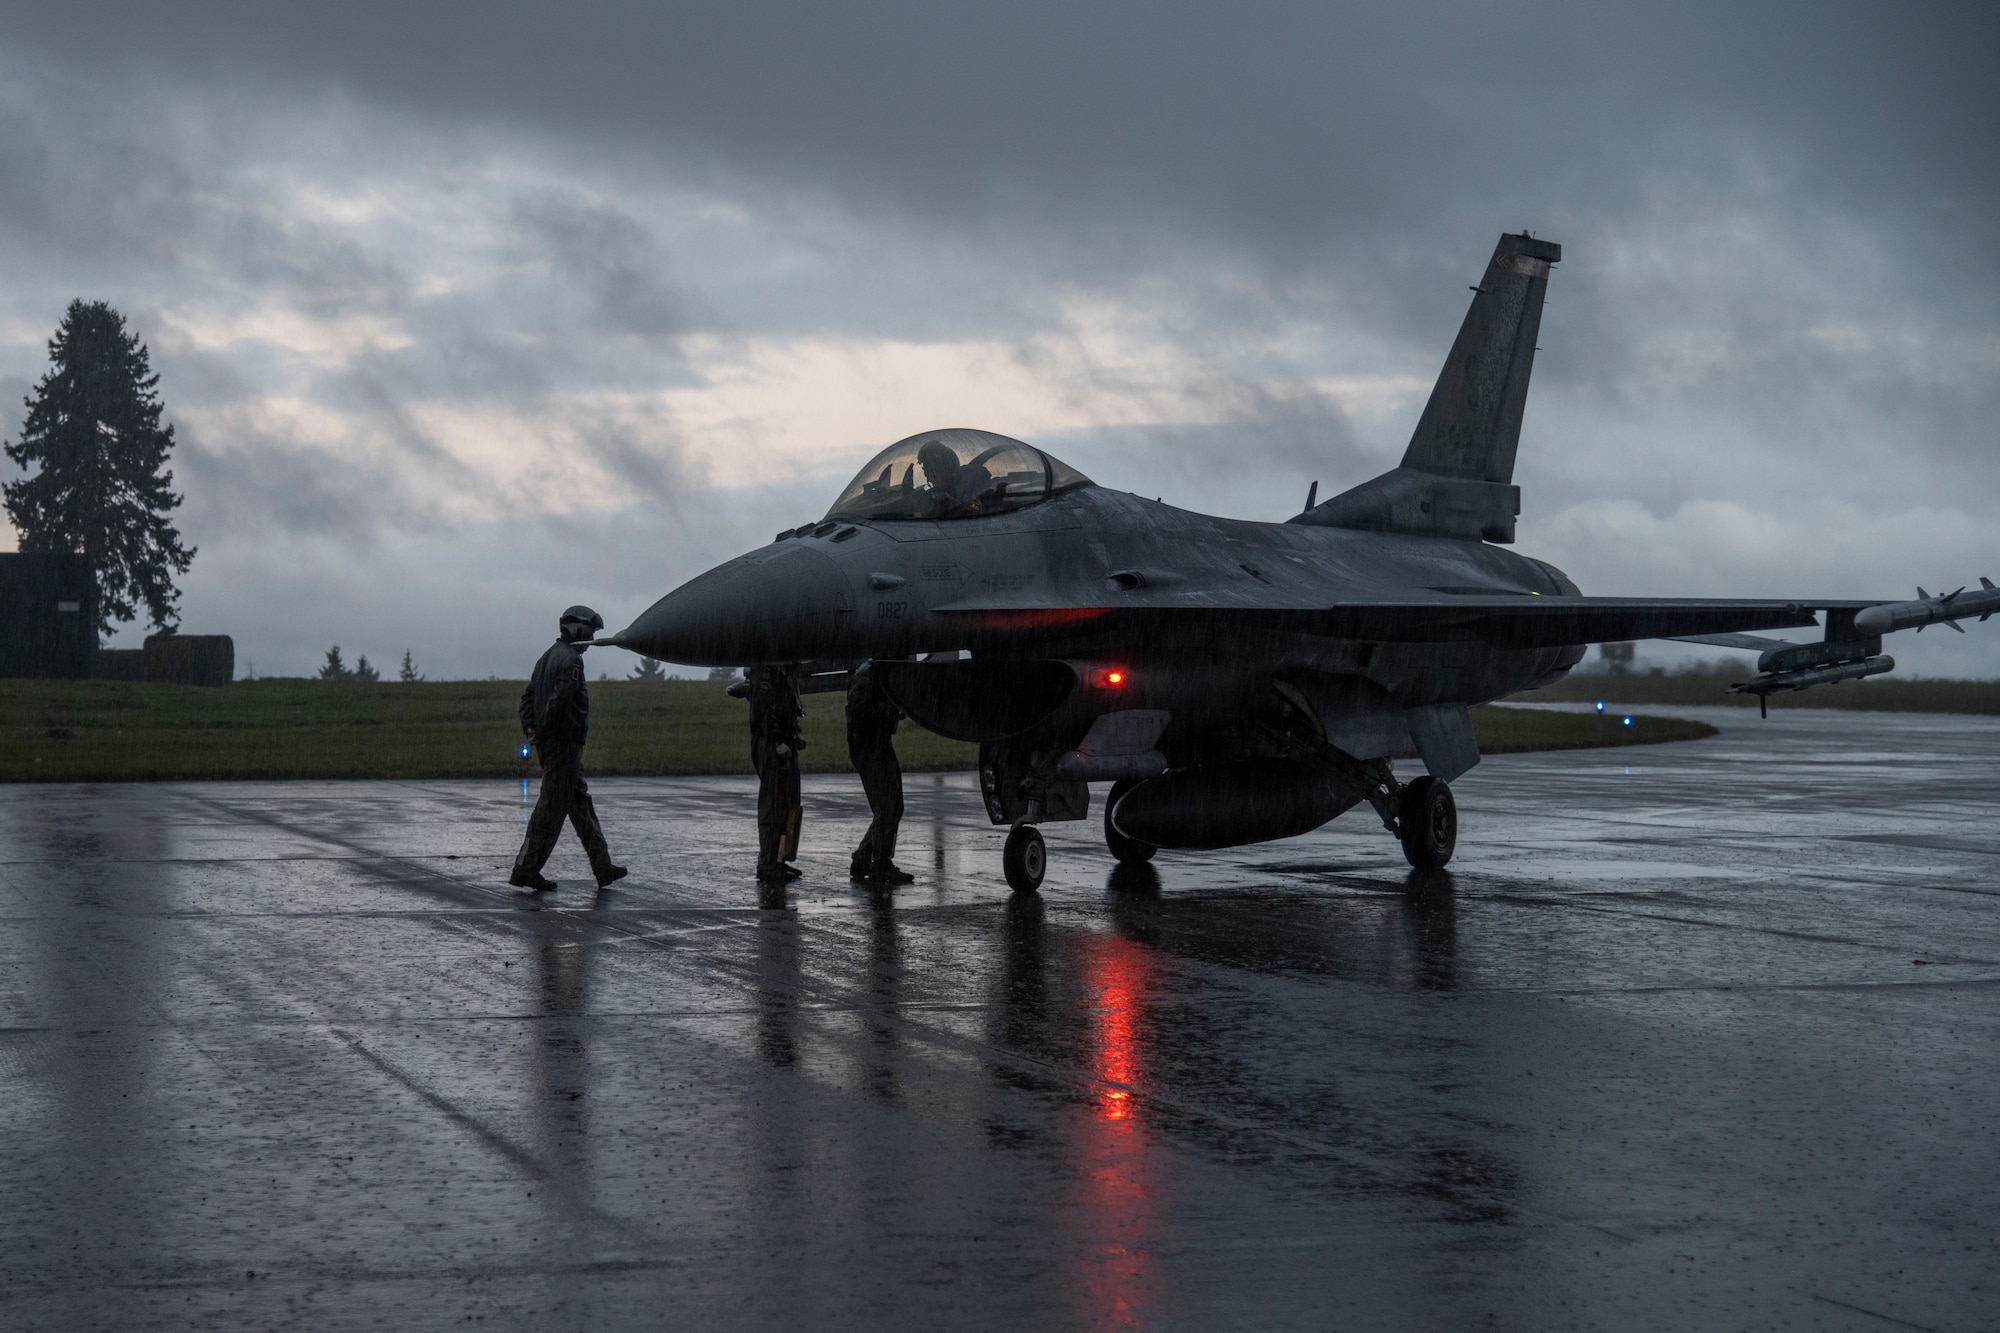 A U.S. Air Force F-16 Fighting Falcon fighter jet assigned to the 480th Fighter Squadron at Spangdahlem Air Base, Germany, sits on an apron at Büchel Air Base, Germany, after a flight from Spangdahlem AB on Nov. 2, 2021. The aircraft landed at Büchel AB as part of Castle Forge, a USAFE-AFAFRICA-led joint multinational training event incorporating eight wings throughout the area of responsibility. (U.S. Air Force photo by Senior Airman Ali Stewart)